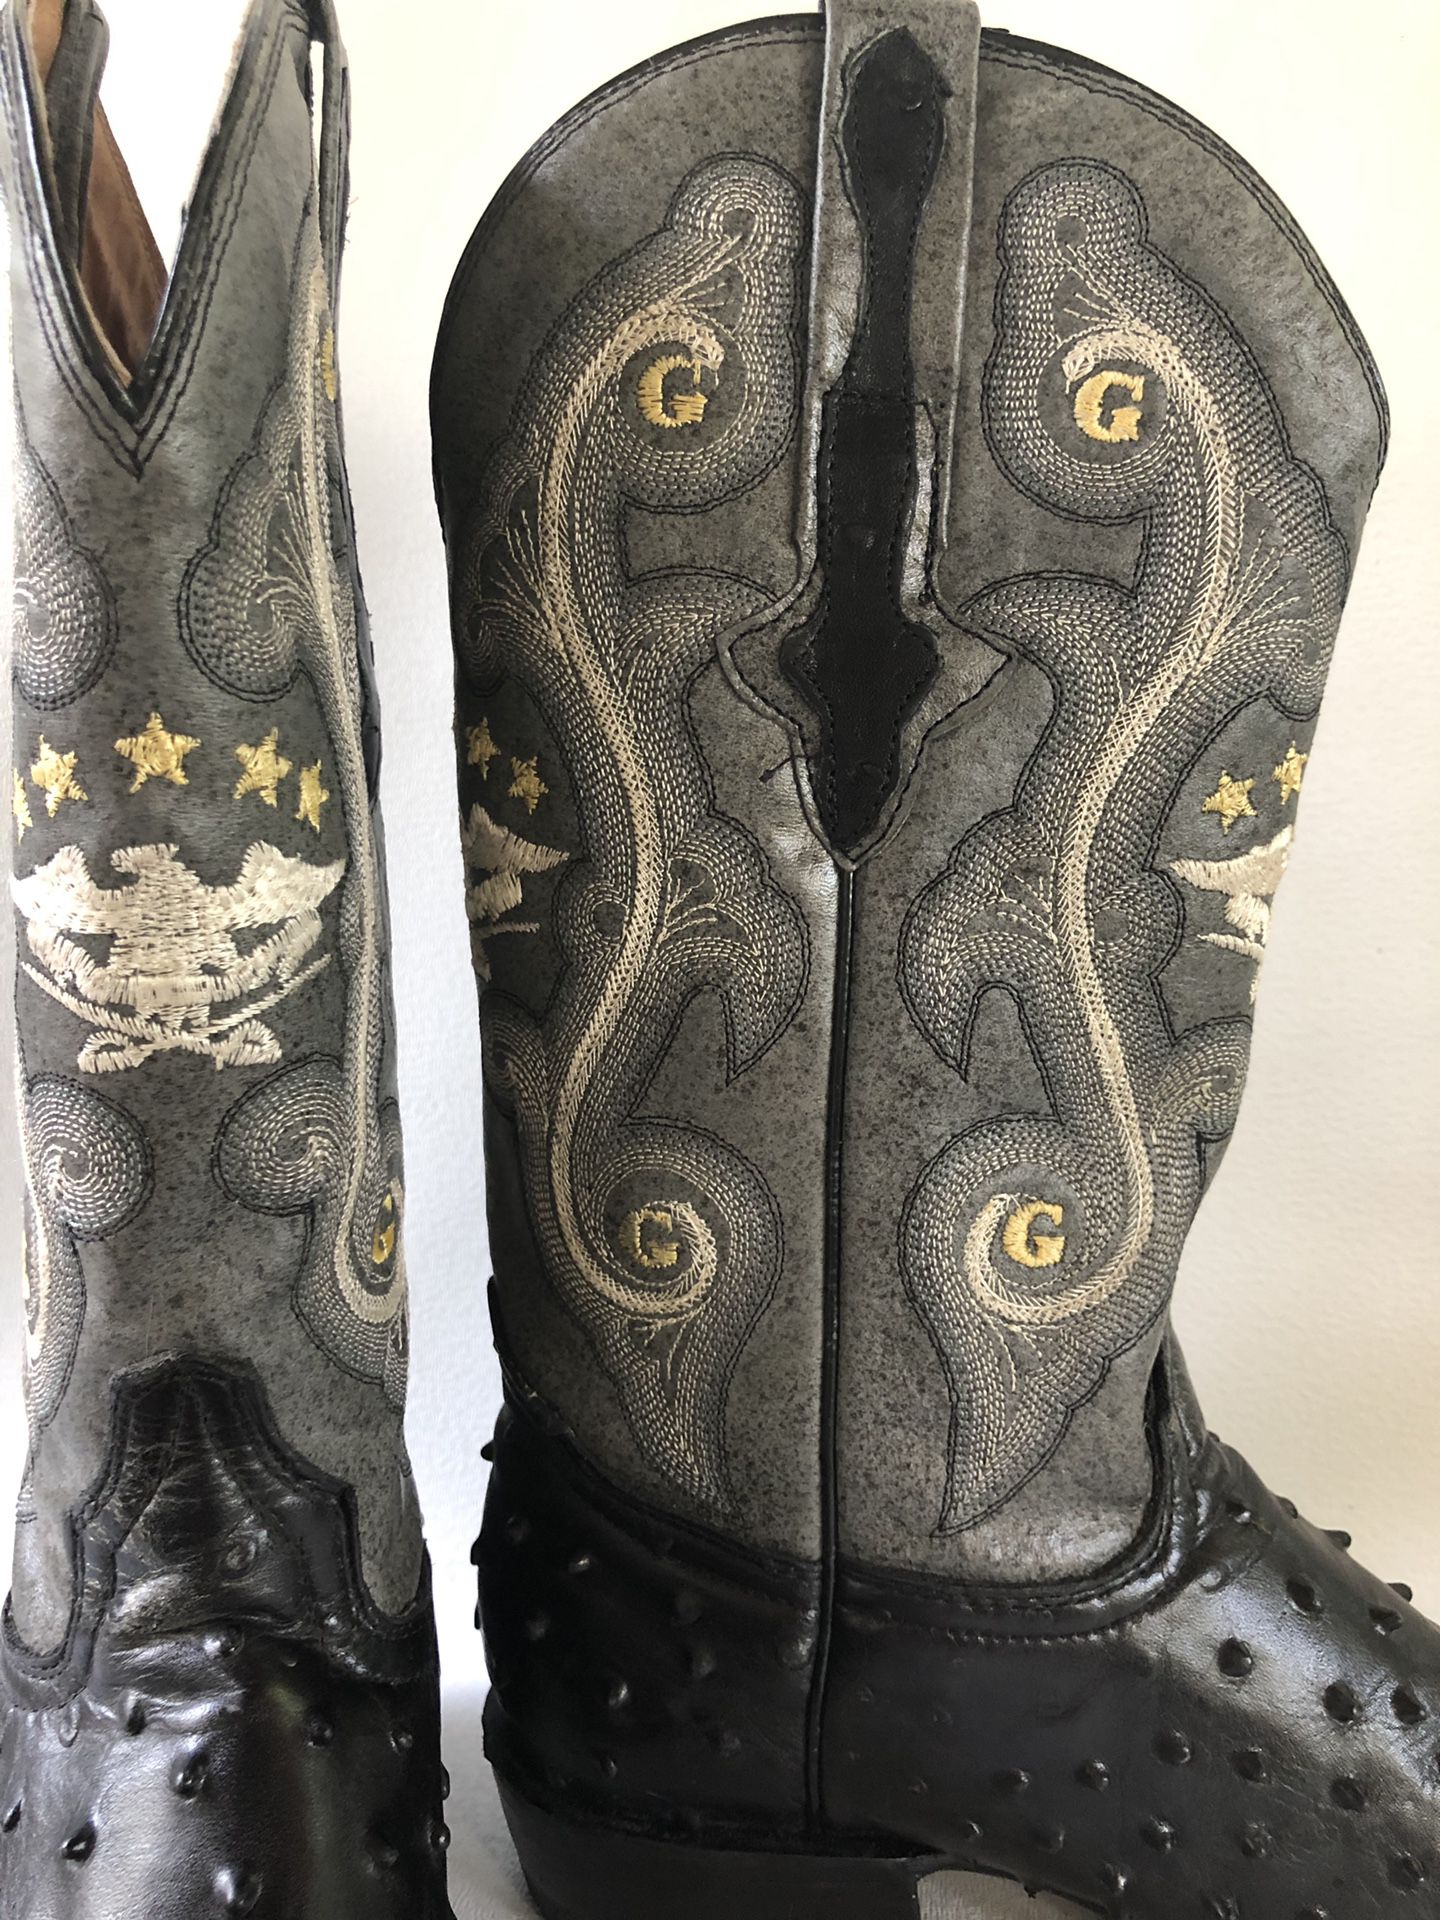 EL General 1901 handcrafted Leather Embroidered Cowboy Boots